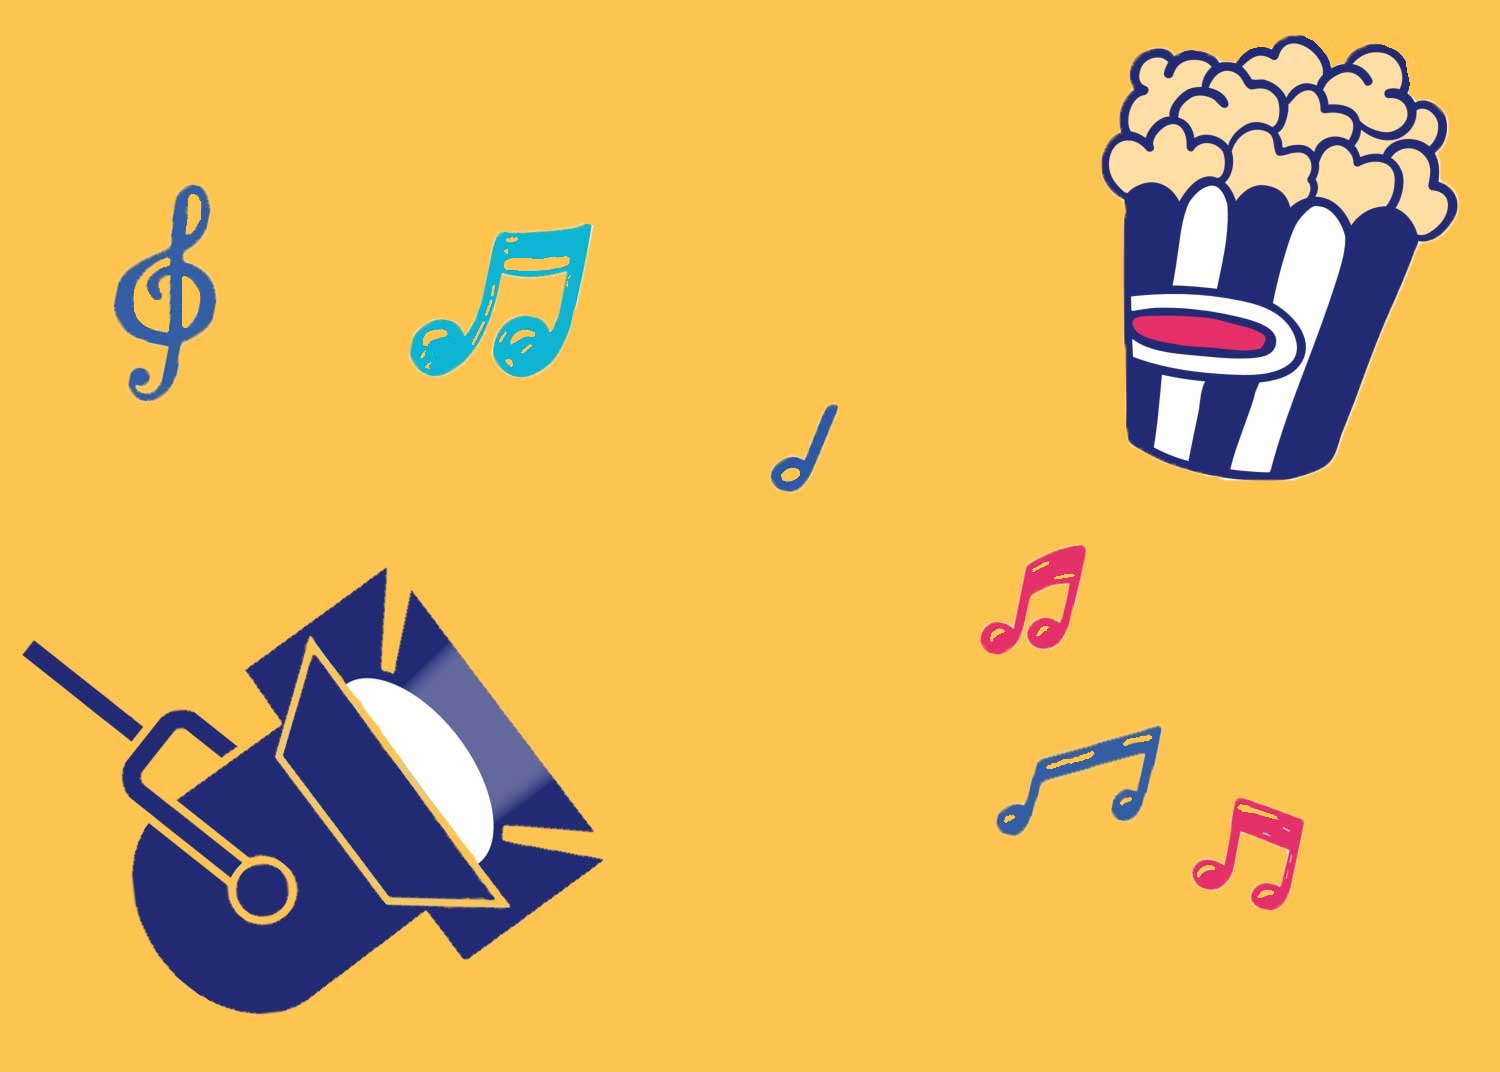 Illustration of theatre light, music notes and a box of popcorn against a yellow background.